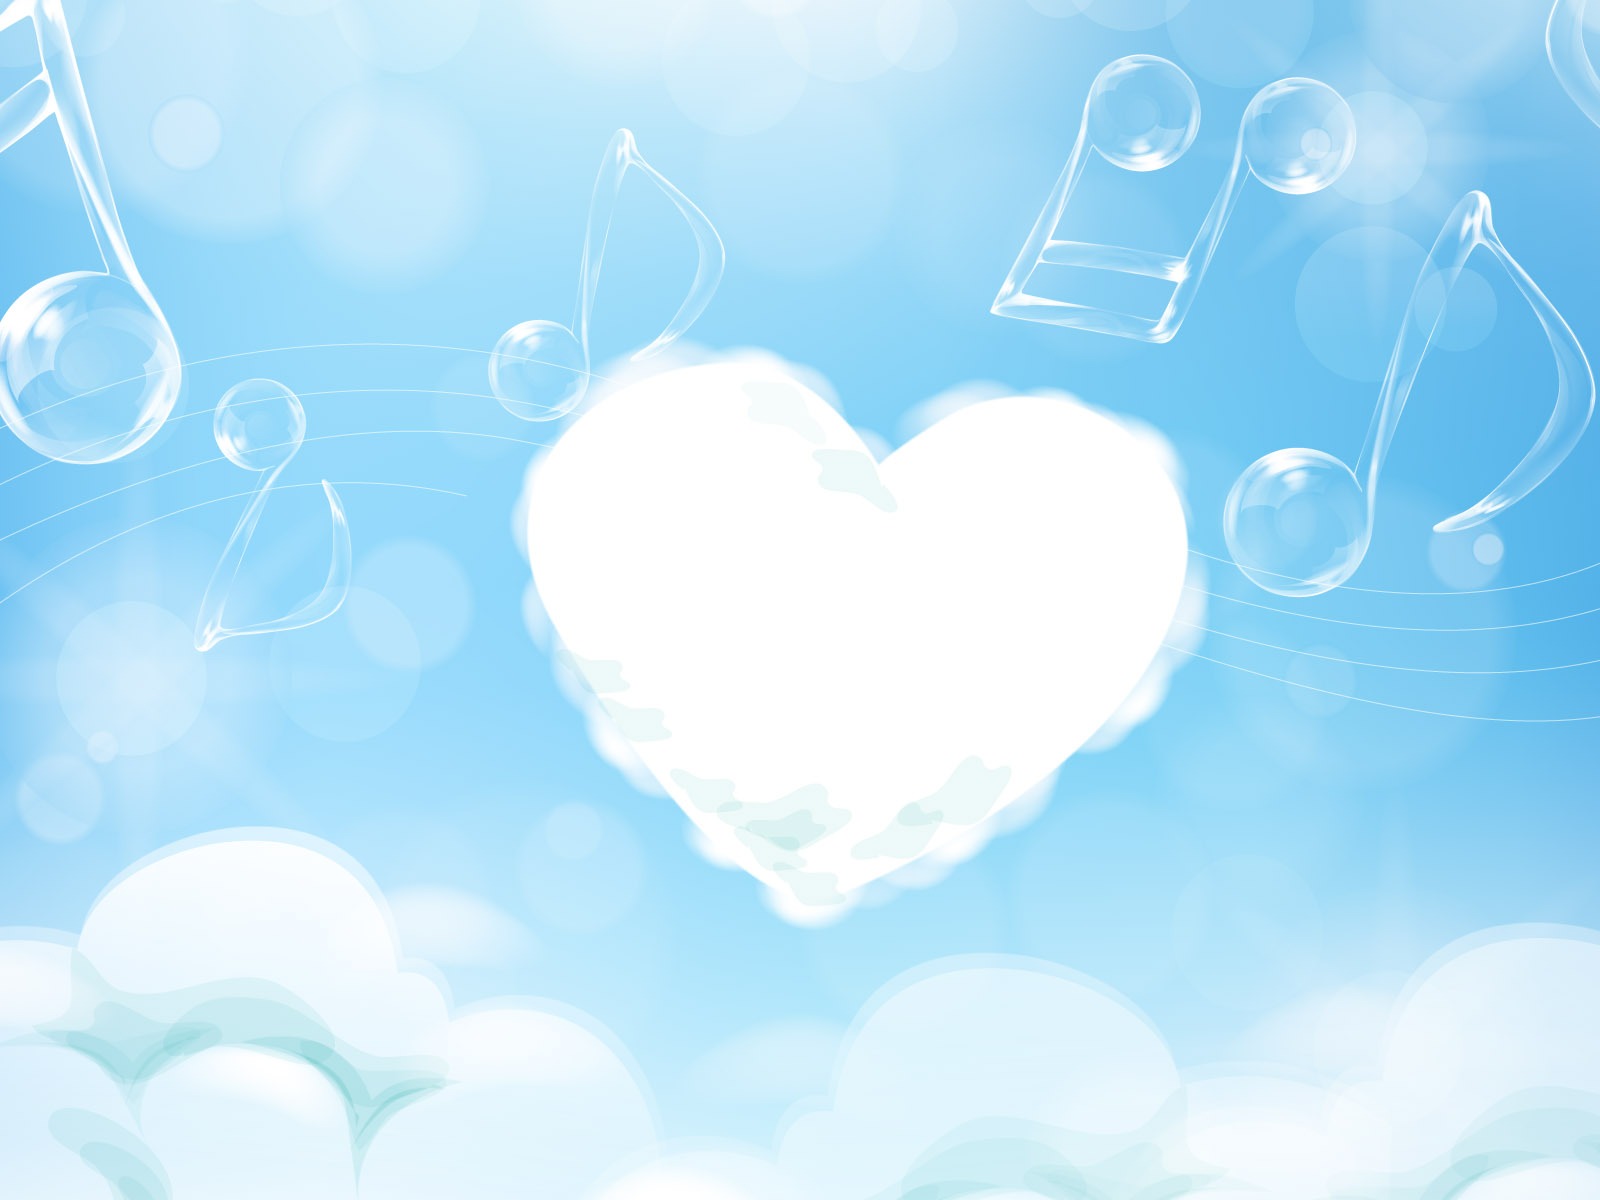 Valentine's Day Love Theme Wallpapers (3) #2 - 1600x1200